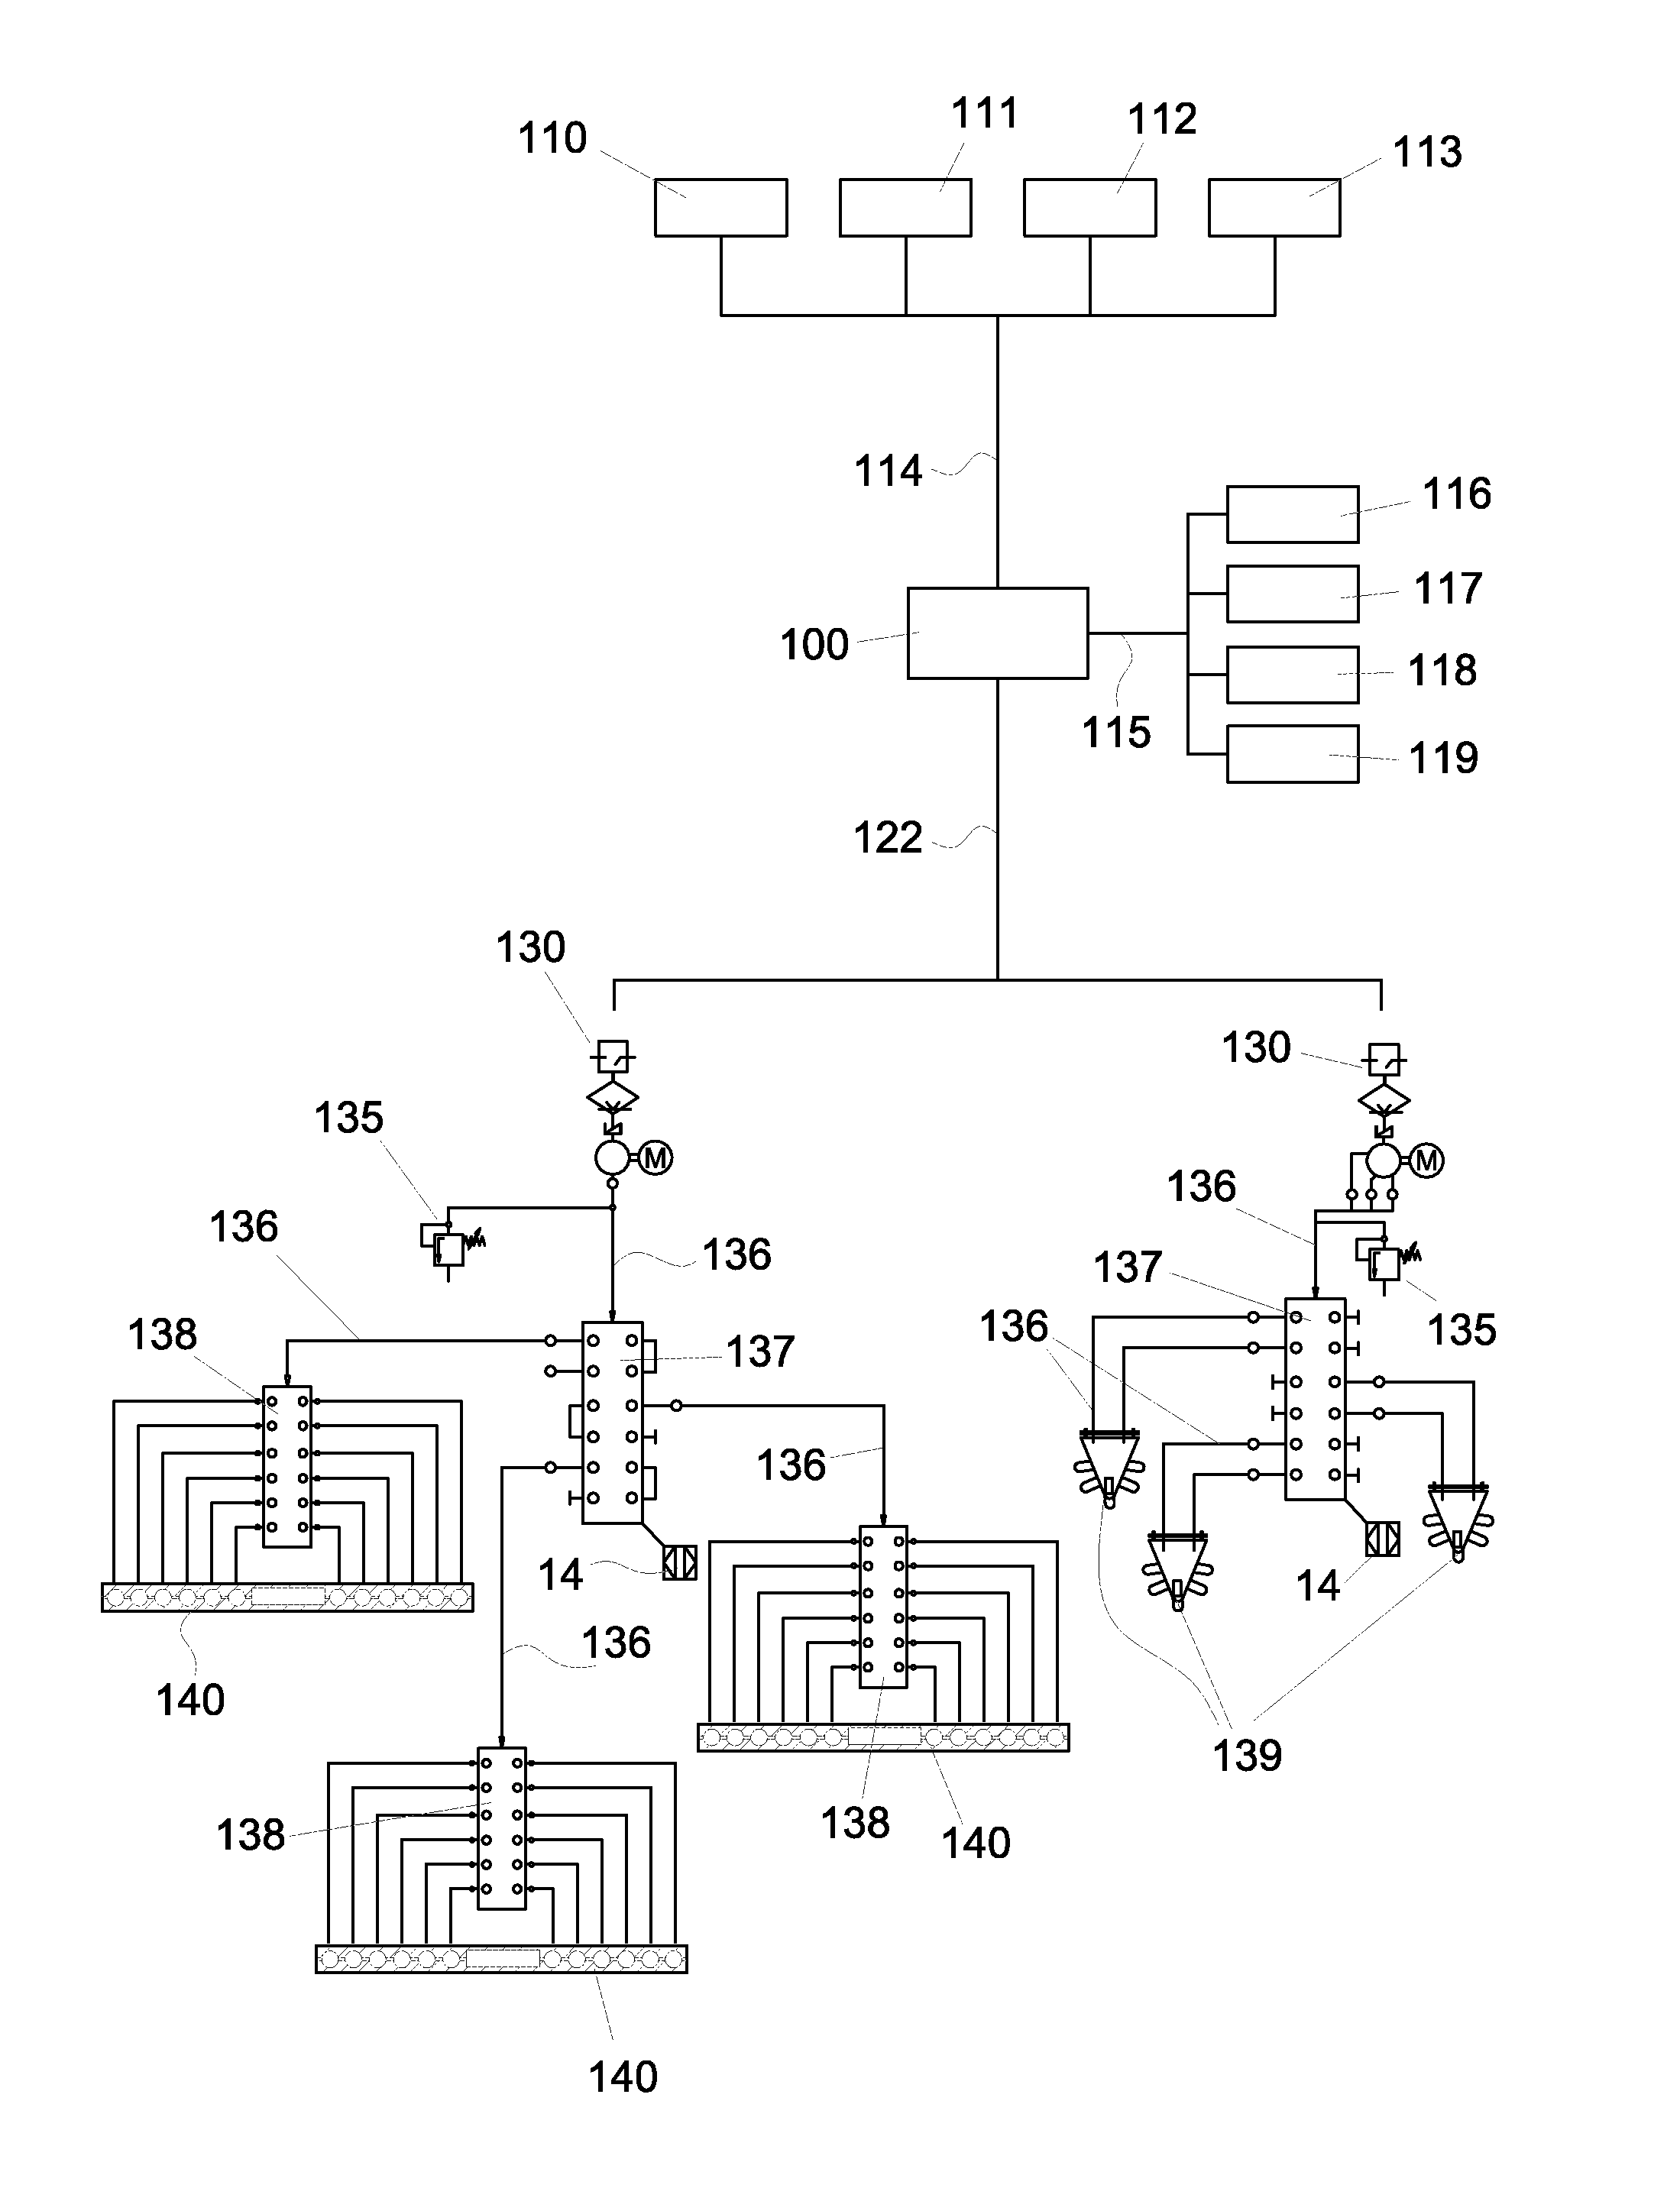 Method for dynamically lubricating a wind turbine pitch blade bearing